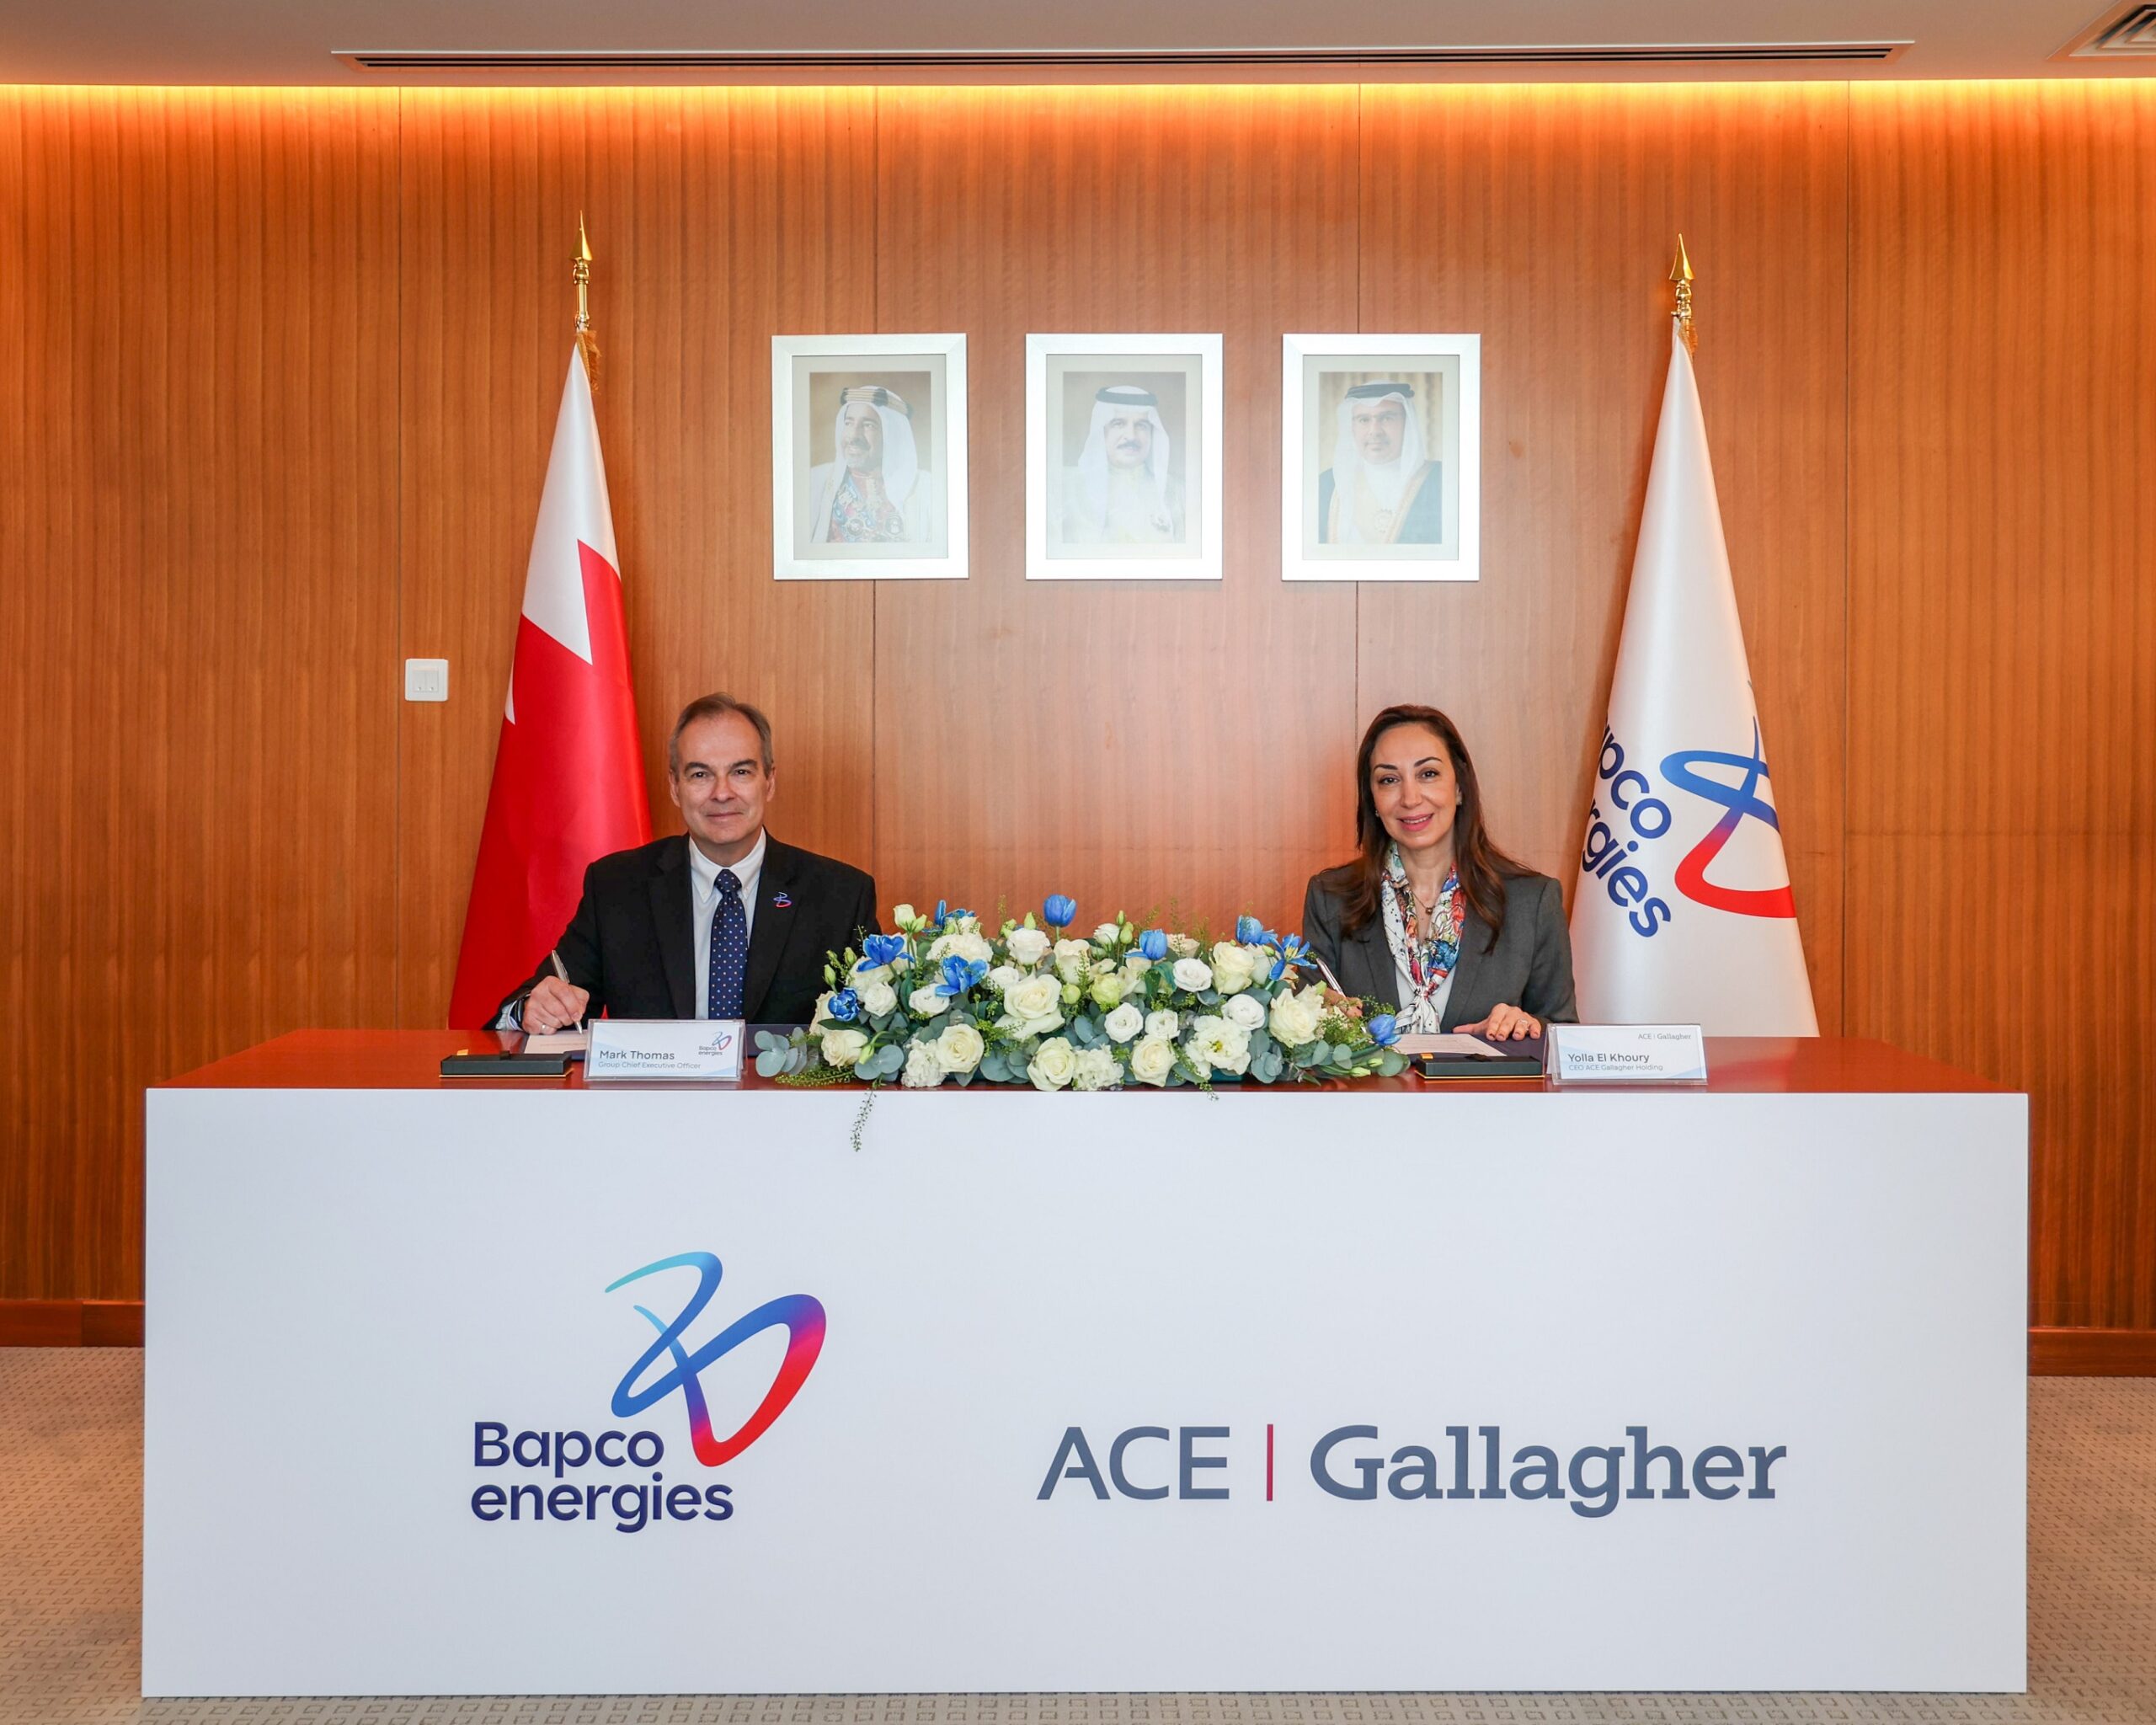 Bapco Energies Enters Strategic Partnership with ACE Gallagher to Establish an Insurance Captive